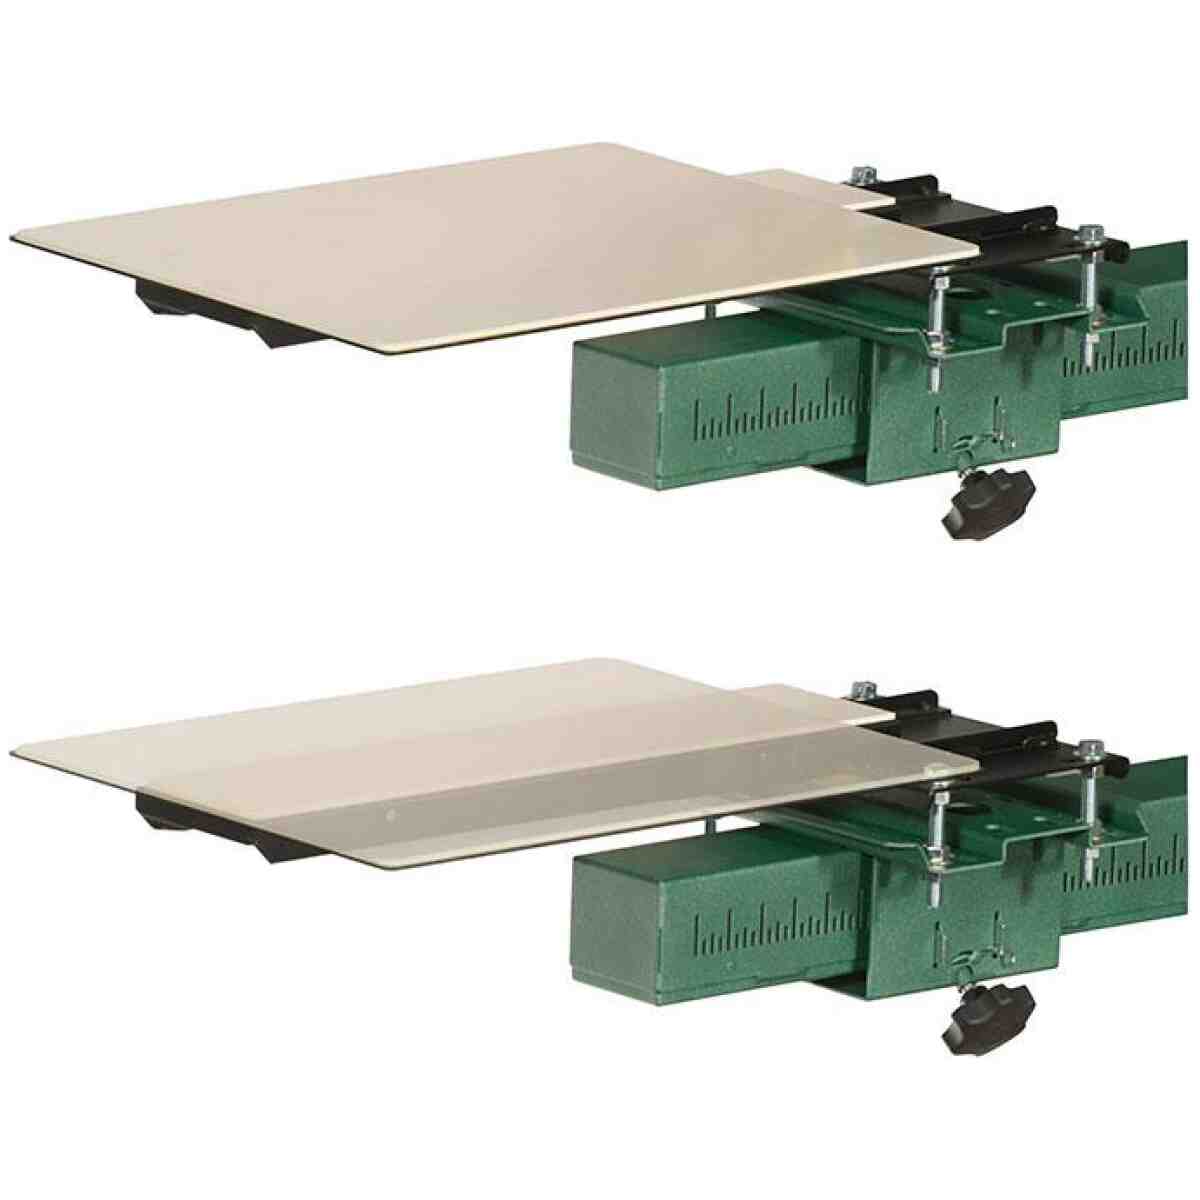 Vastex Pallet Attachments - Clamp Ons (Includes Rubber Top) VASTEX®